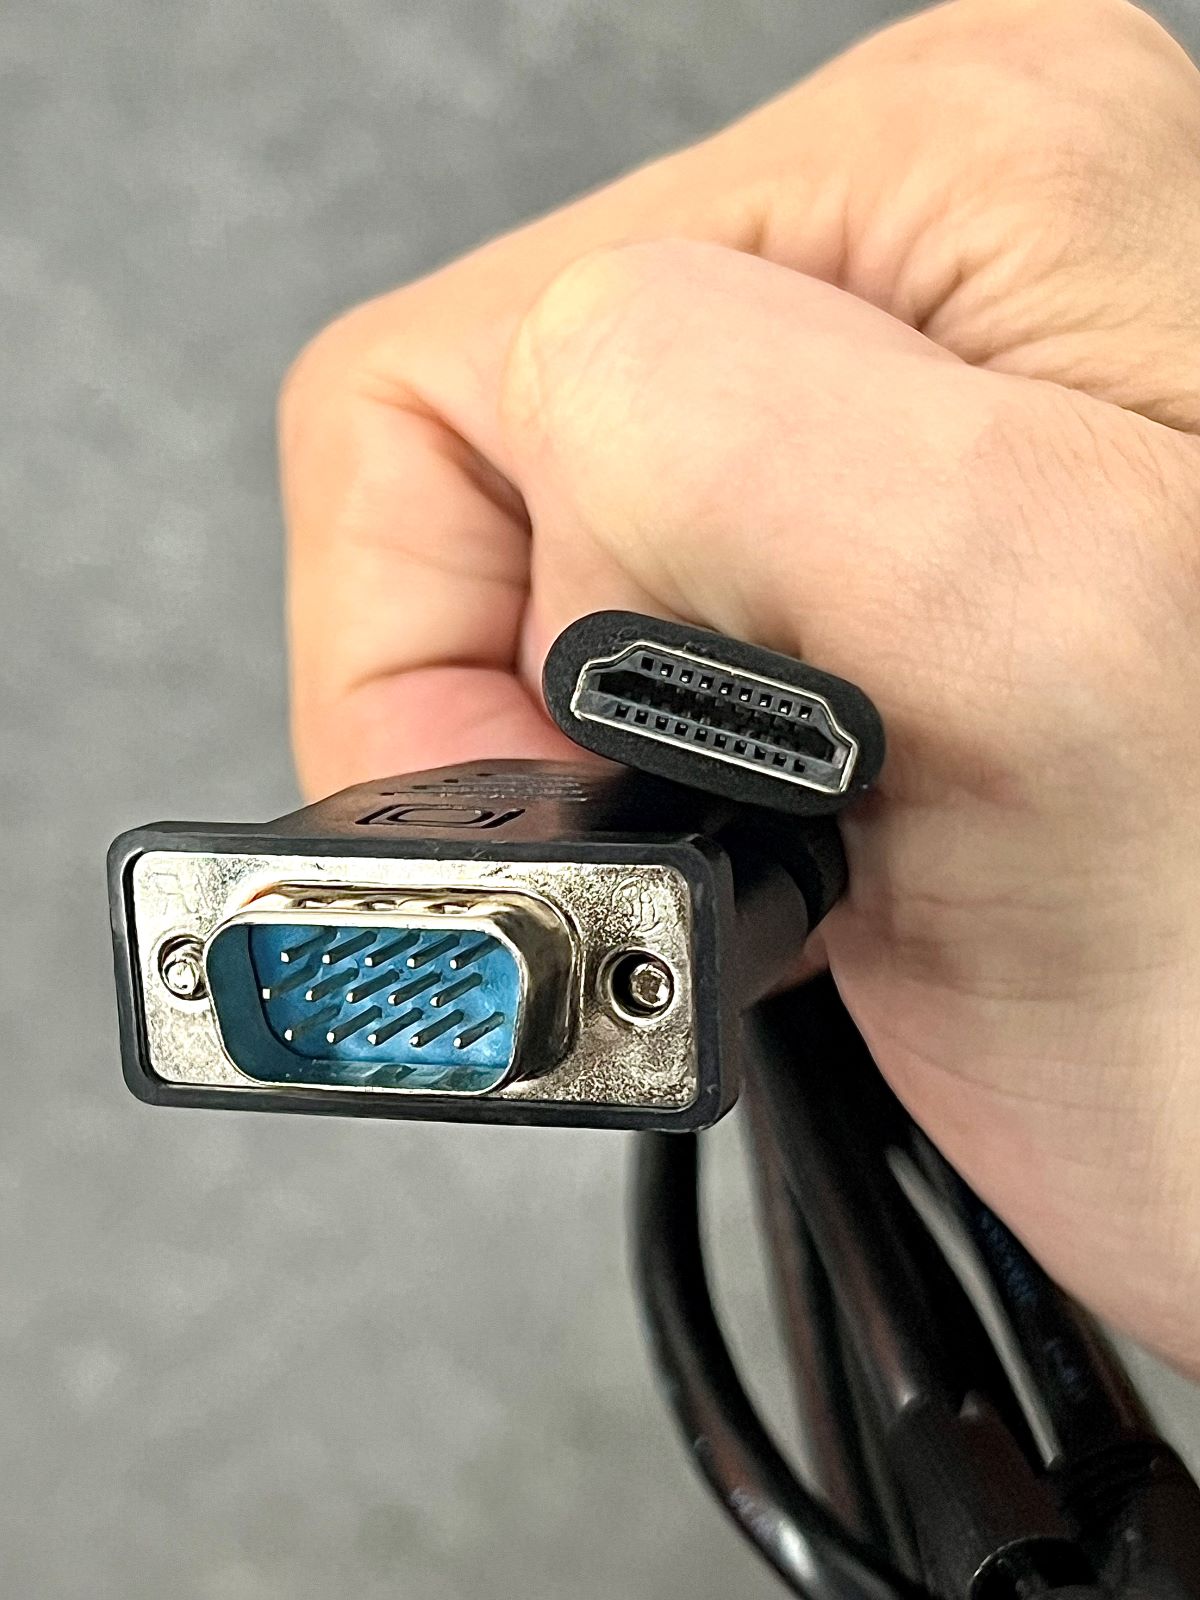 a hand holding a vga cable and an hdmi cable